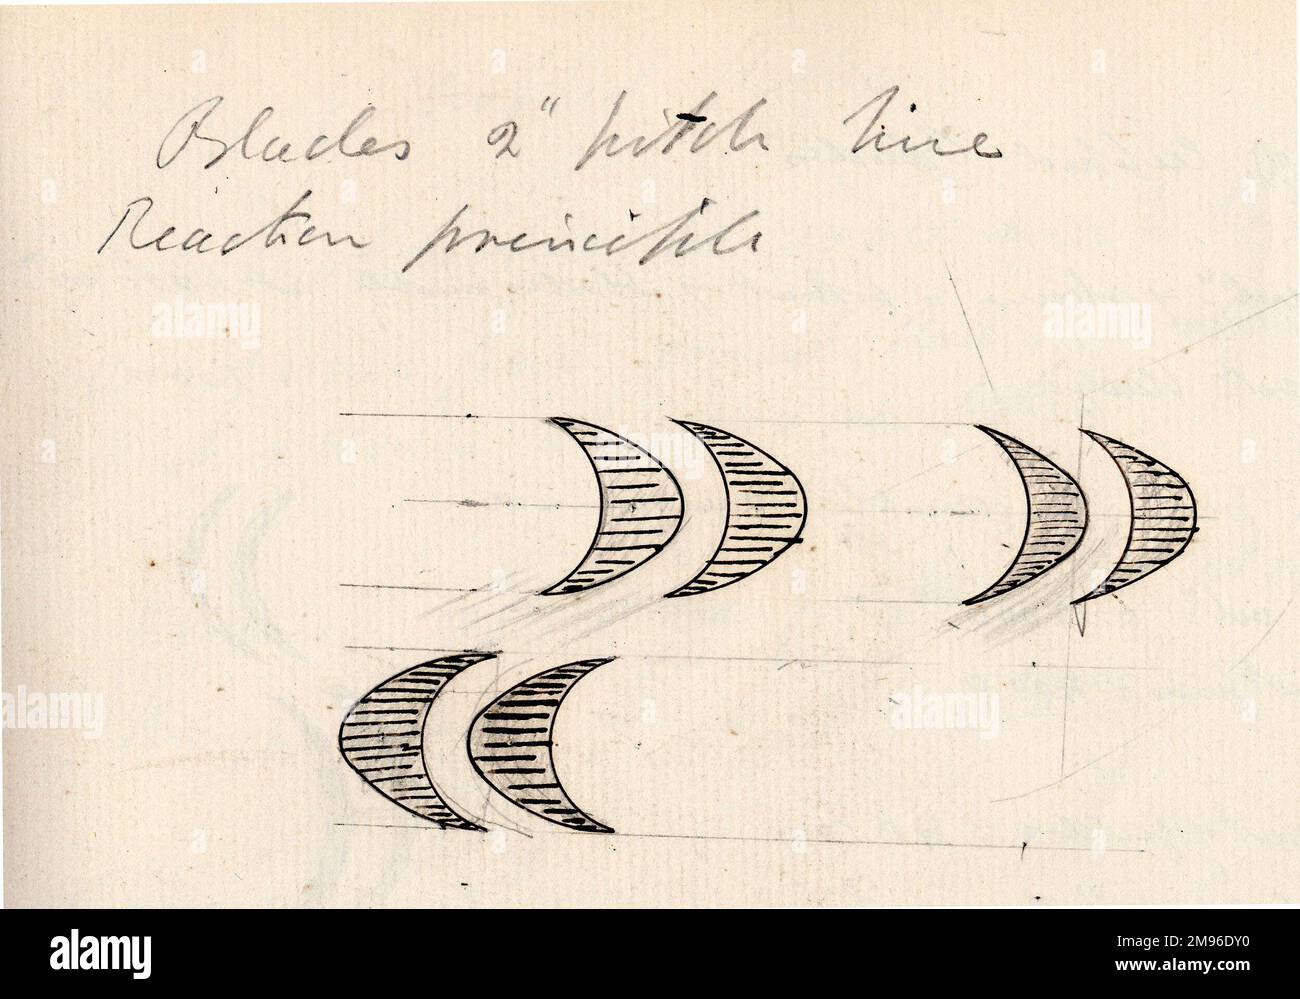 Steam turbine blades from an early sketch by Sir Charles Parsons, 1897 Stock Photo